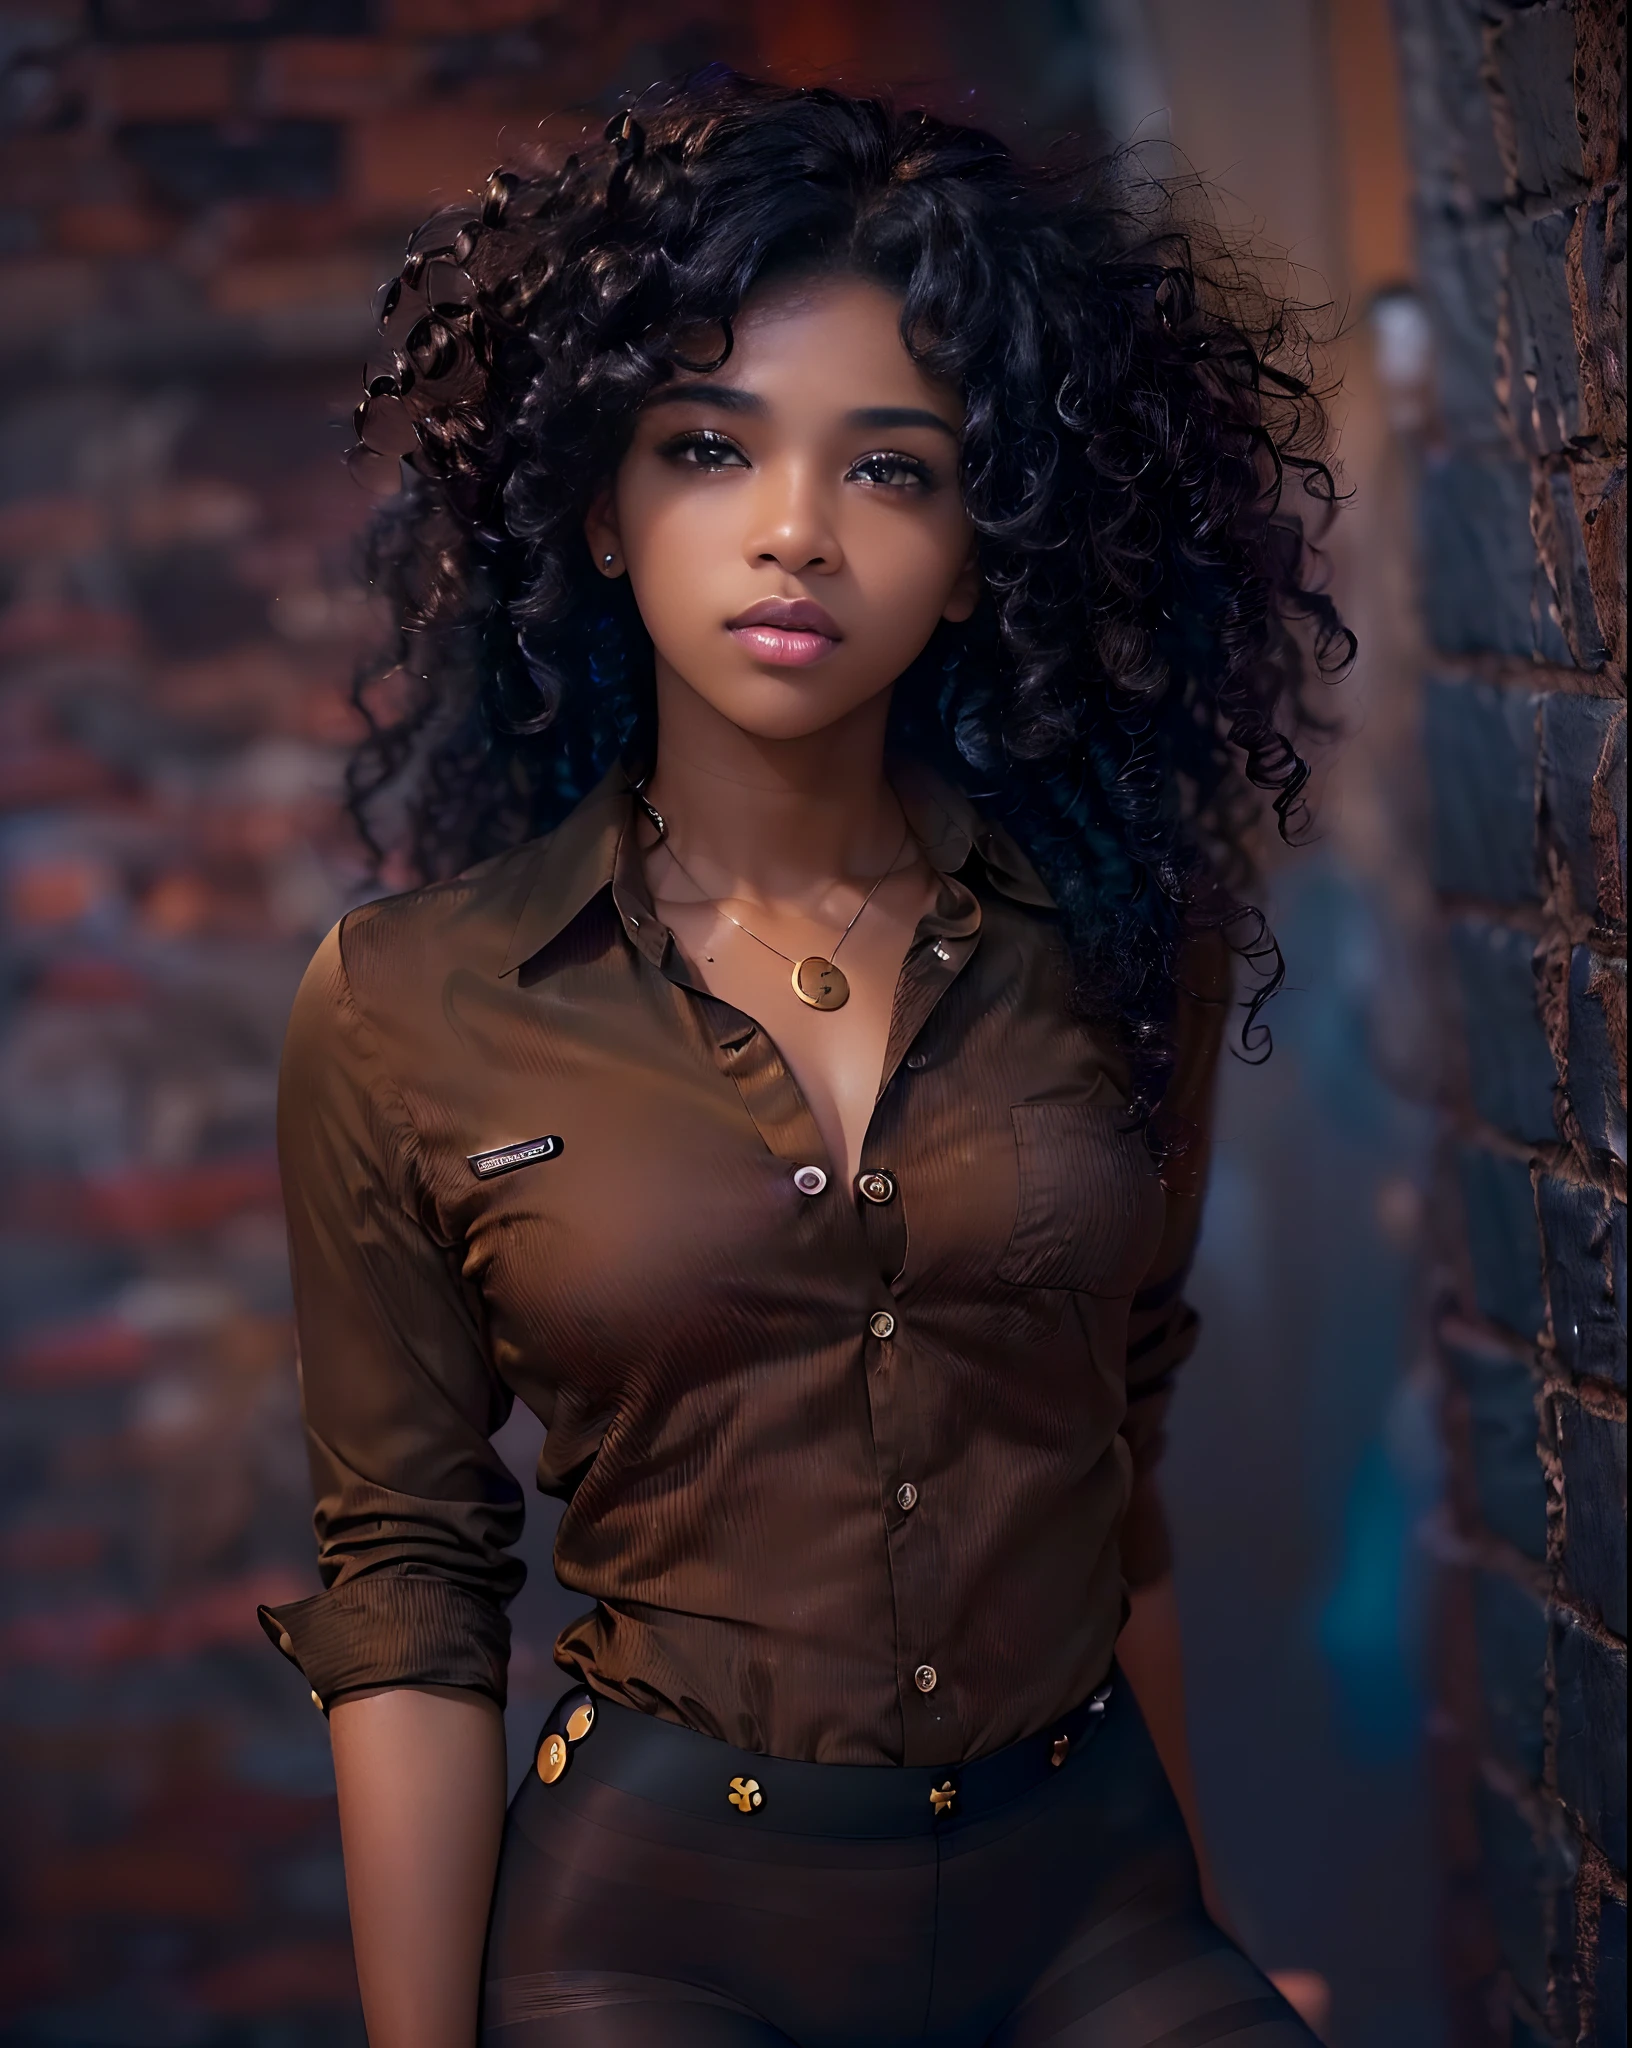 ((21-year-old))) mixed black girl, (((light skin))),  (((close-up, full body pose))),  (((long curly black hair))), (((seamless black pantyhose))), (((wearing mans button-up shirt, unbuttoned))), Rich, Deep Colours, (intricate details:0.9), (HDR, hyper-detailing:1.2), (natural skin textures, hyper realisitc, glistening skin, soft light, Sharp),